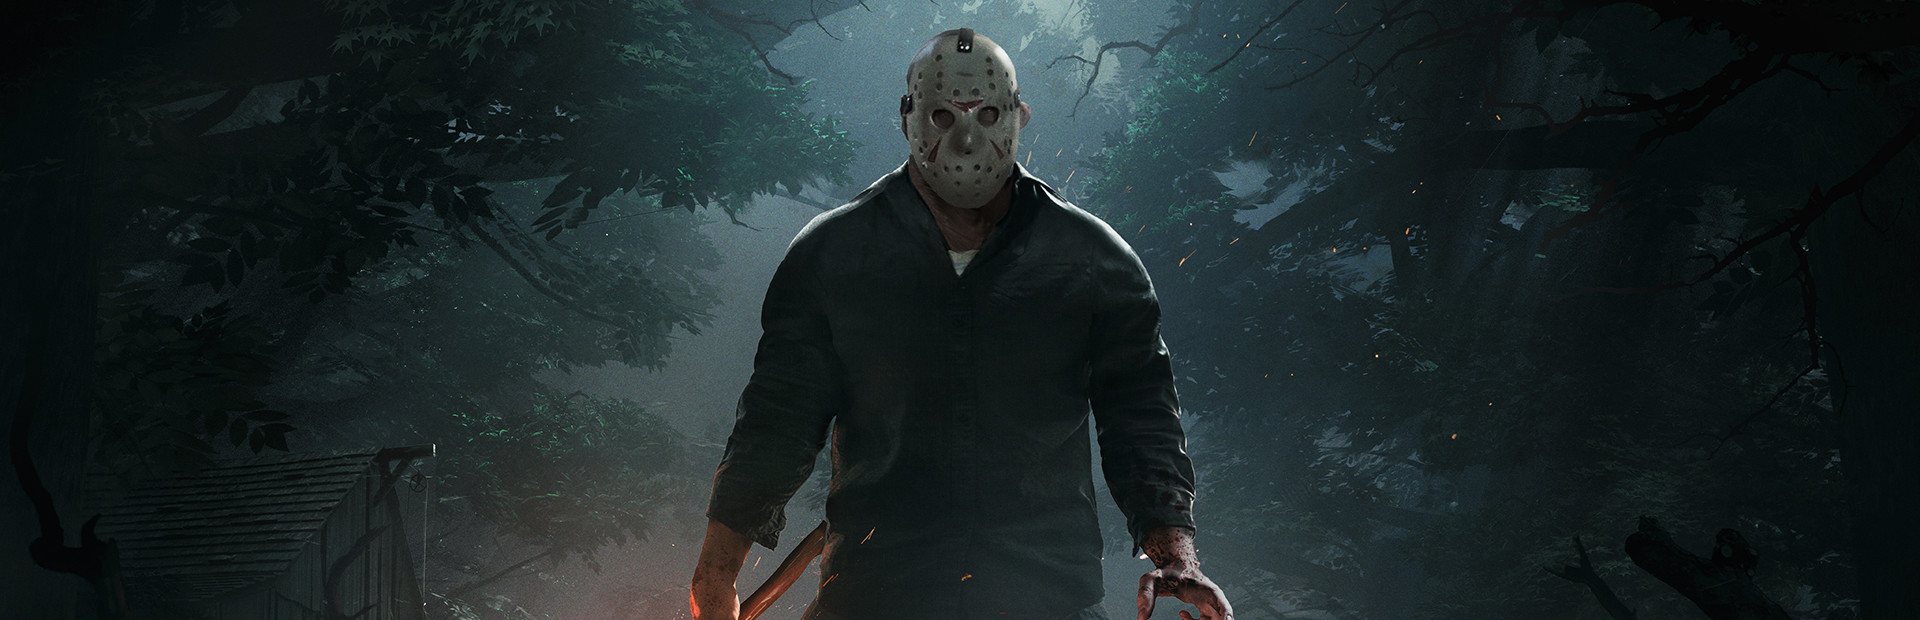 Friday the 13th: The Game cover image